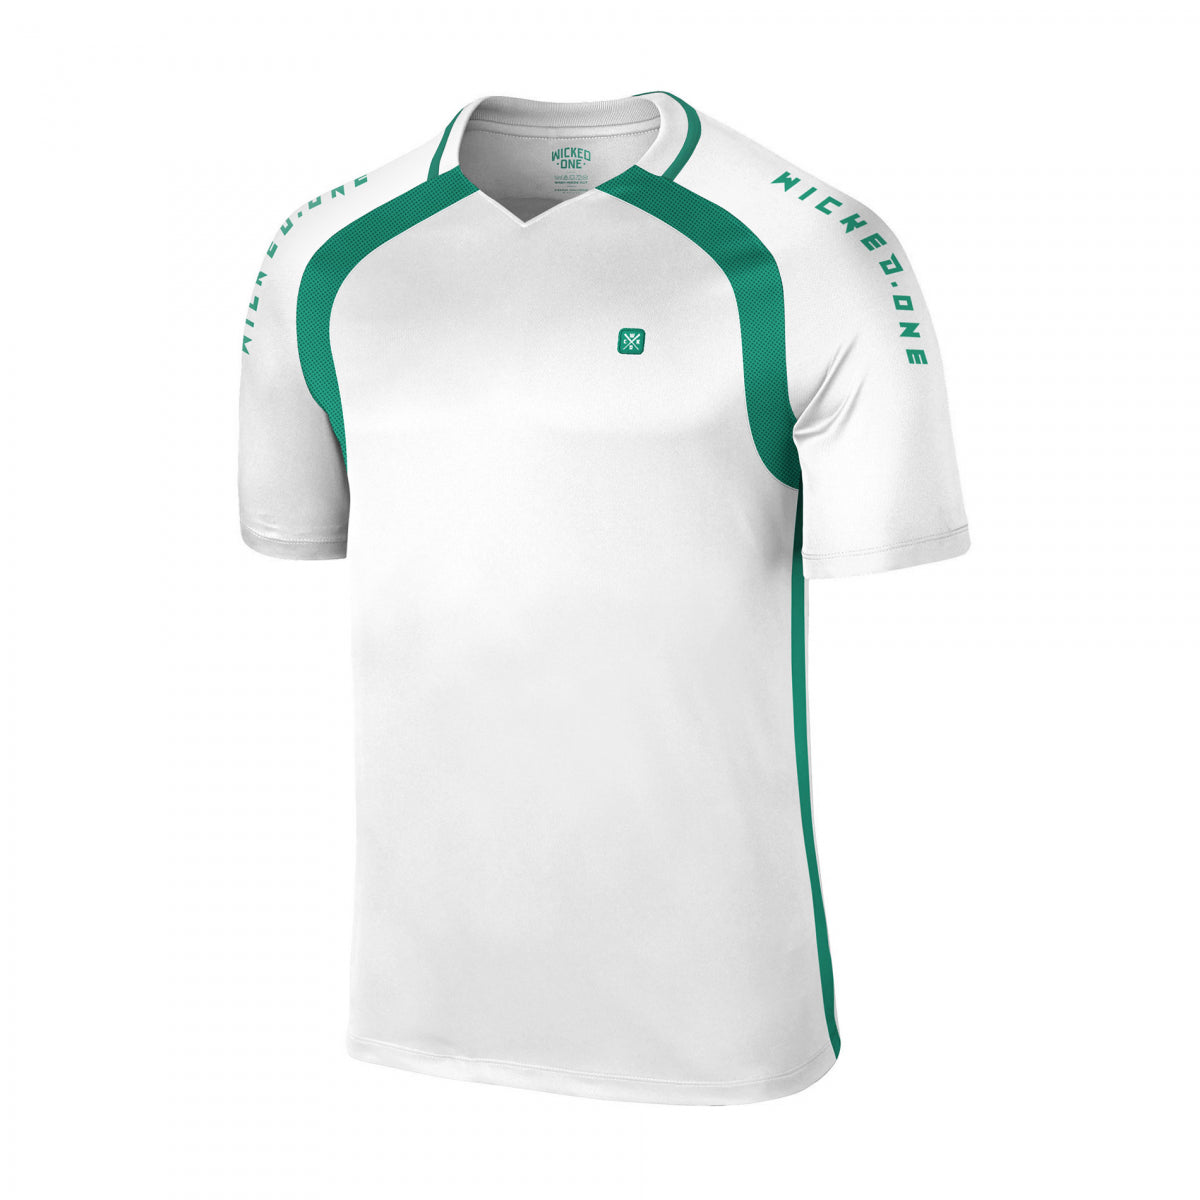 T-Shirt D'Entrainement Wicked One Prime – Blanc/Vert